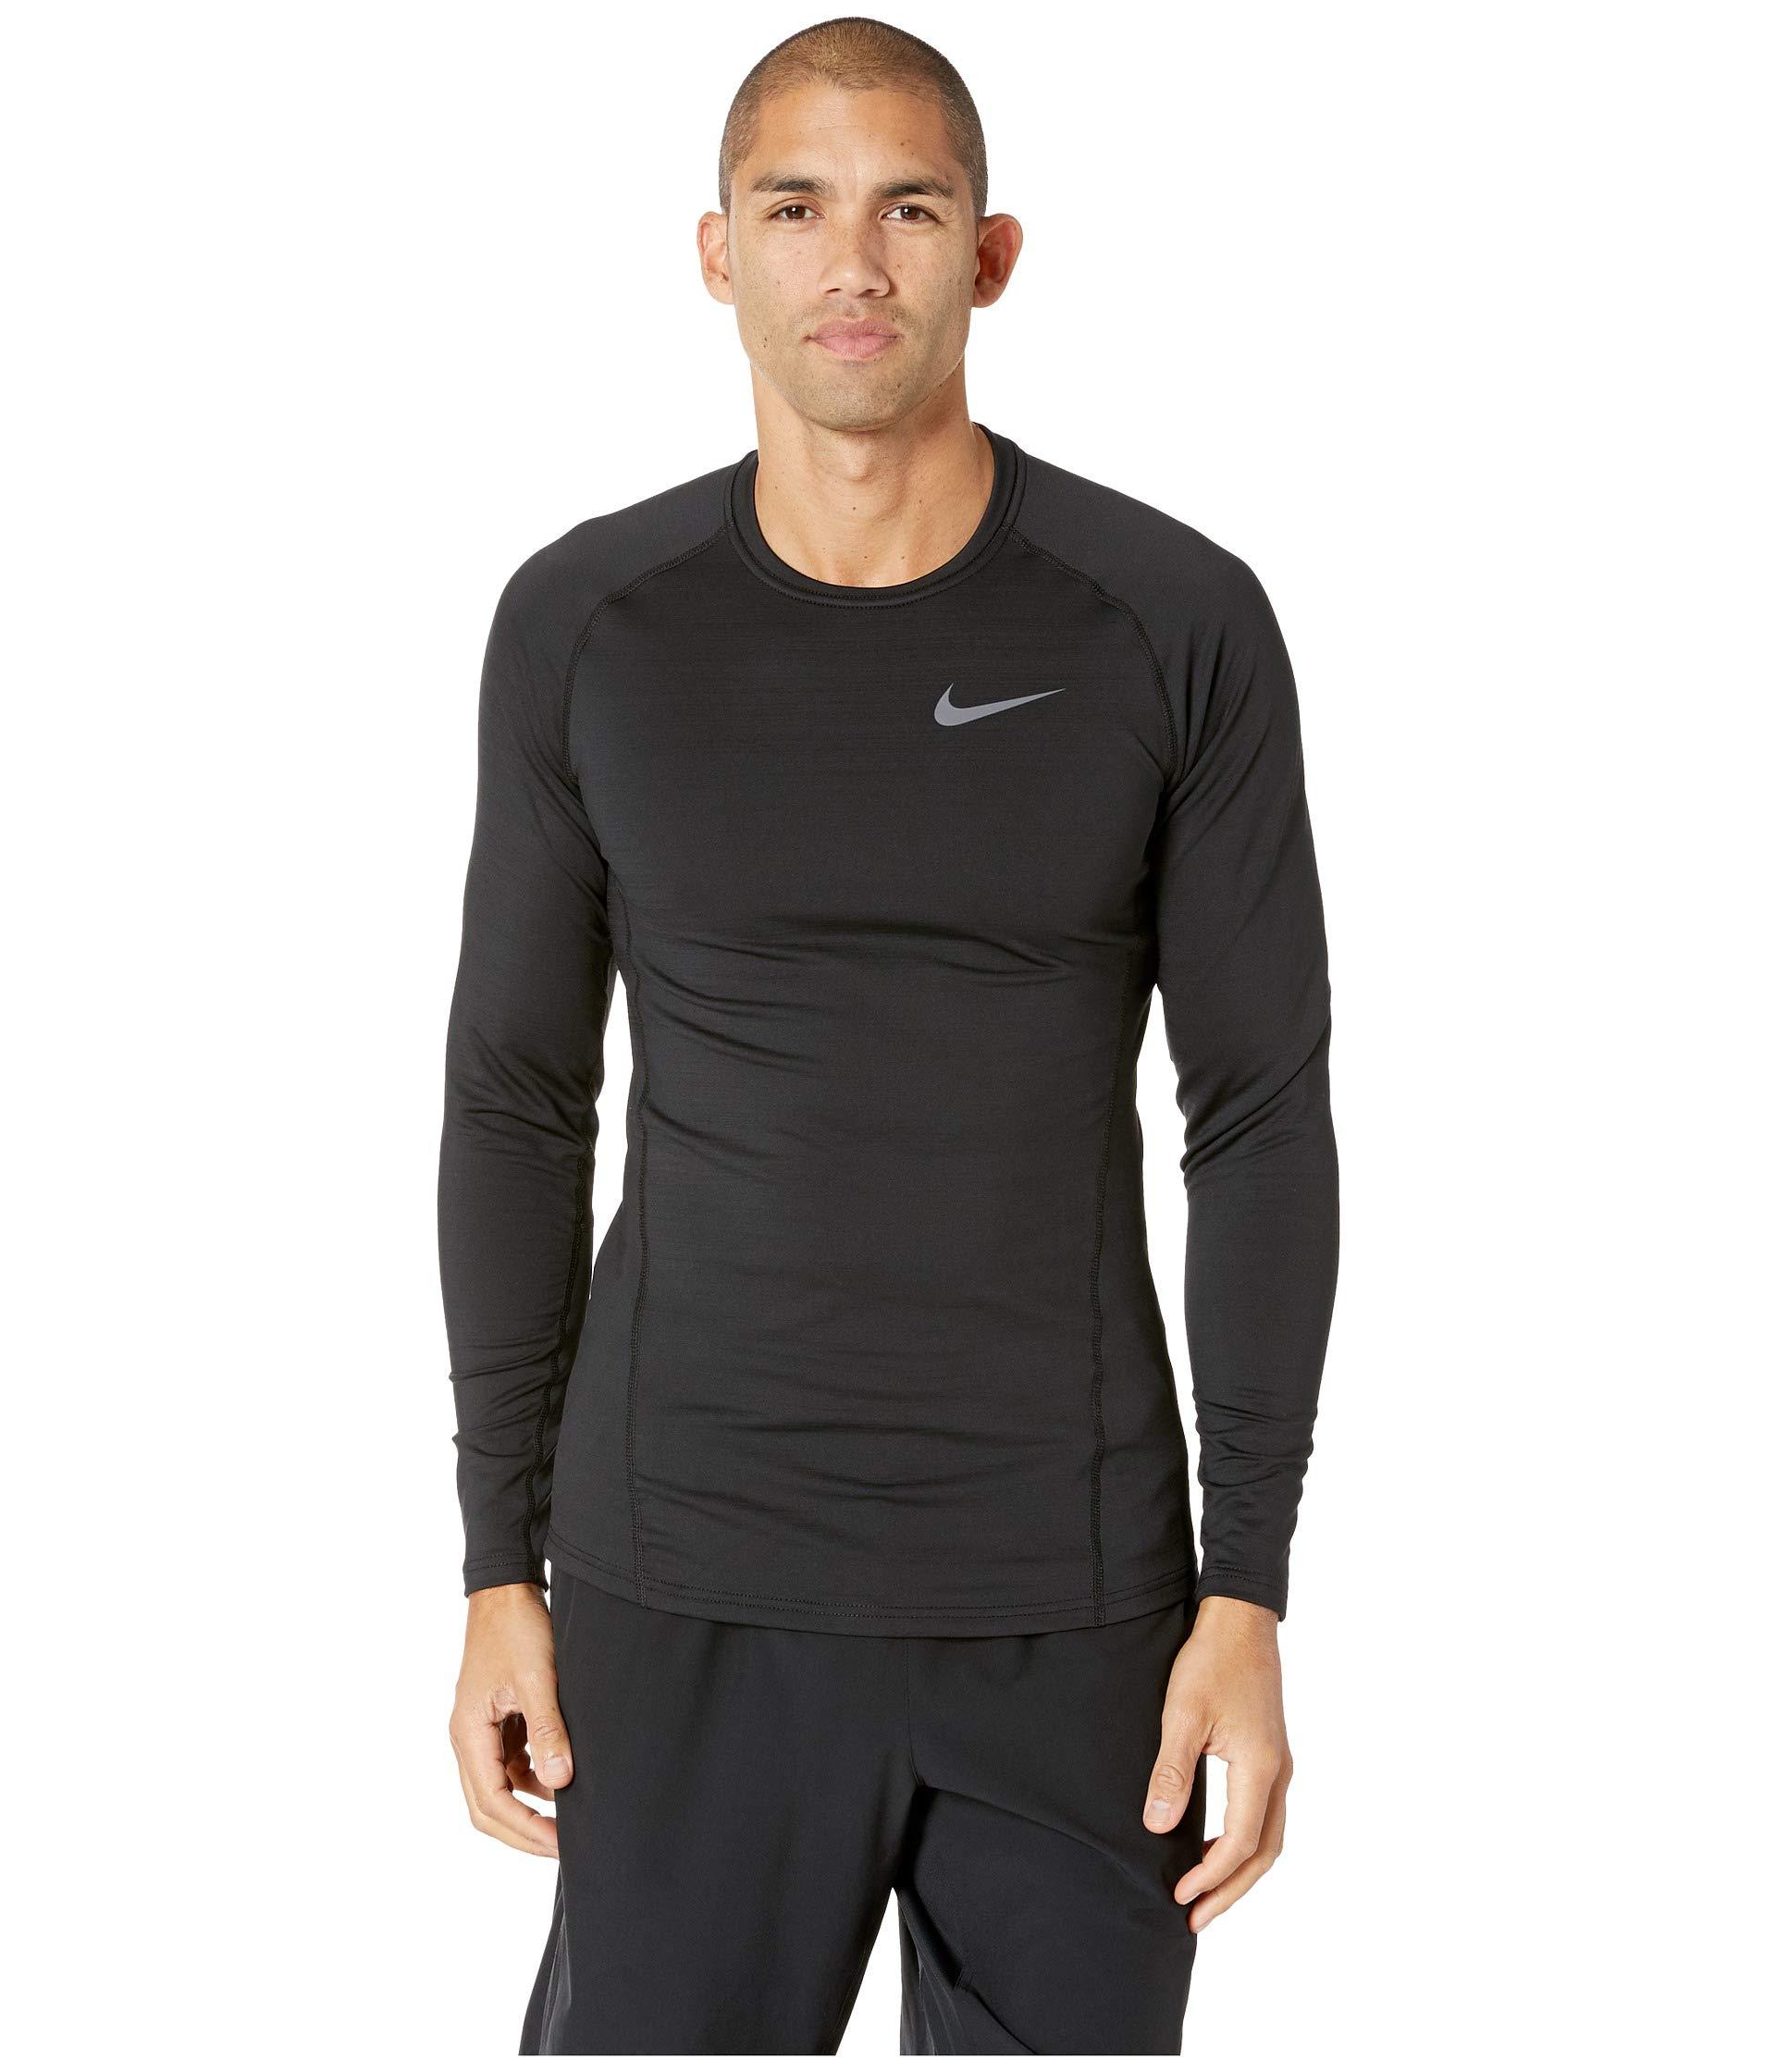 Nike Pro Thermal Top Long Sleeve in Black for Men - Save 22% - Lyst